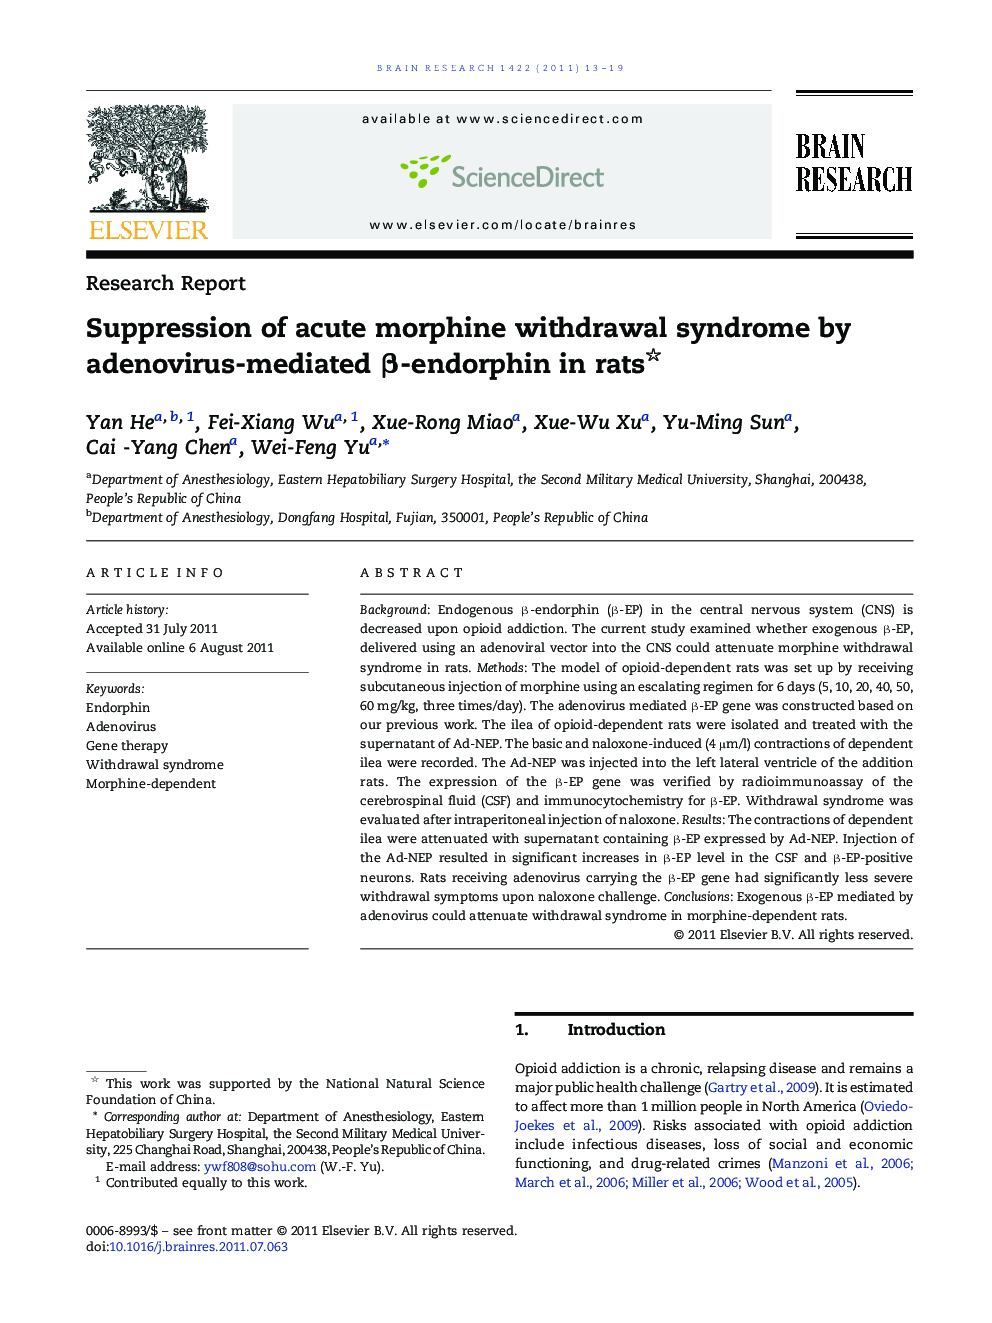 Suppression of acute morphine withdrawal syndrome by adenovirus-mediated Î²-endorphin in rats